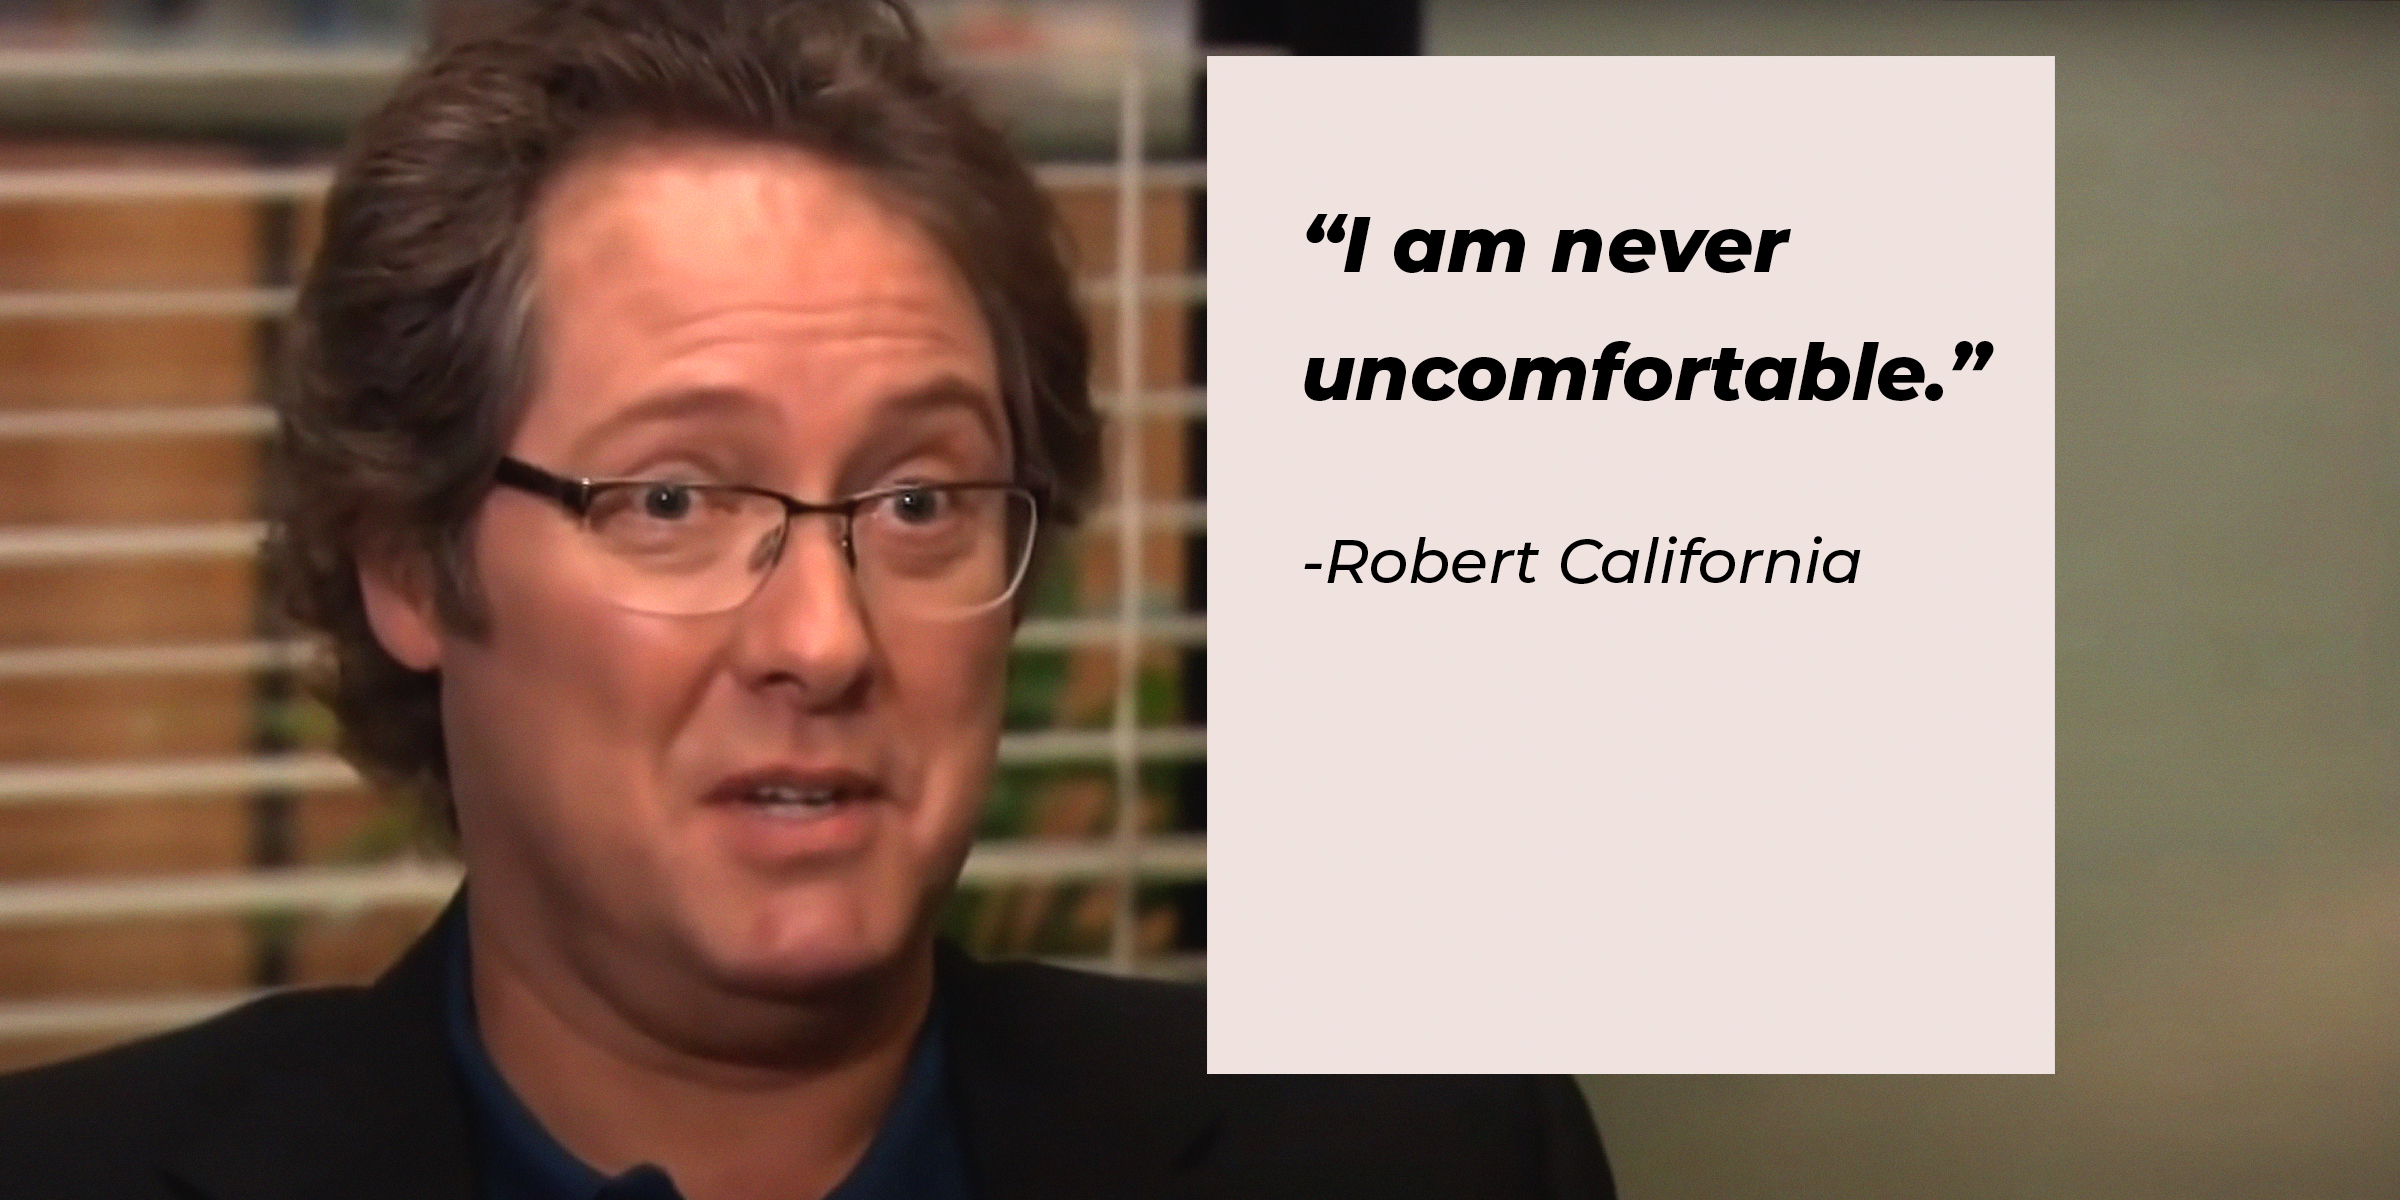 A photo of Robert Califronia with his quote: "I am never uncomfortable." | Source: Facebook.com/TheOfficeTV